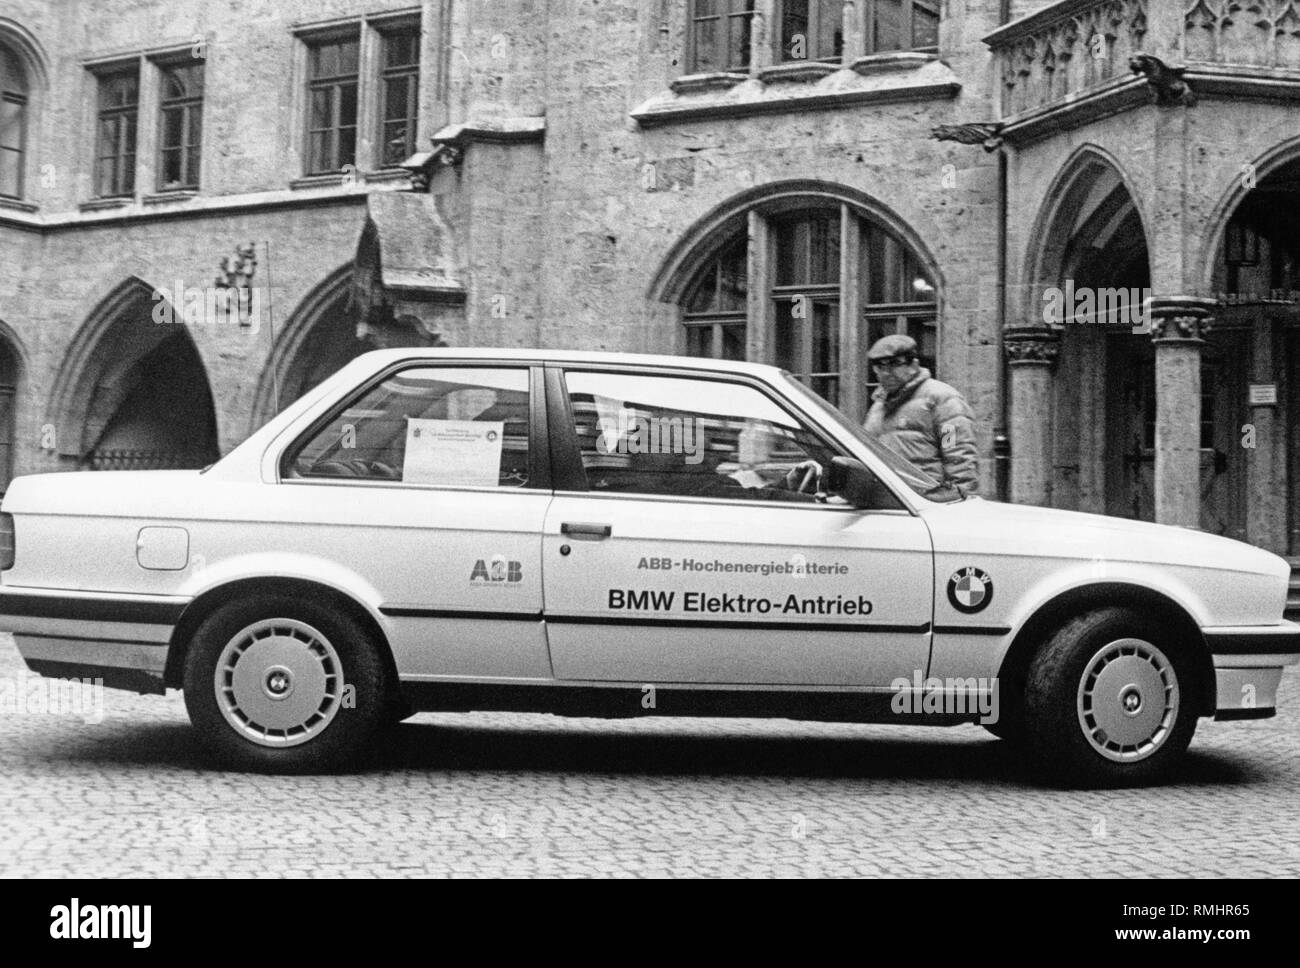 This two-door BMW 3 Series limousine equipped with an electric motor and  high-performance batteries was used by the city of Munich as a test  vehicle. The 3d of the Series E30 has